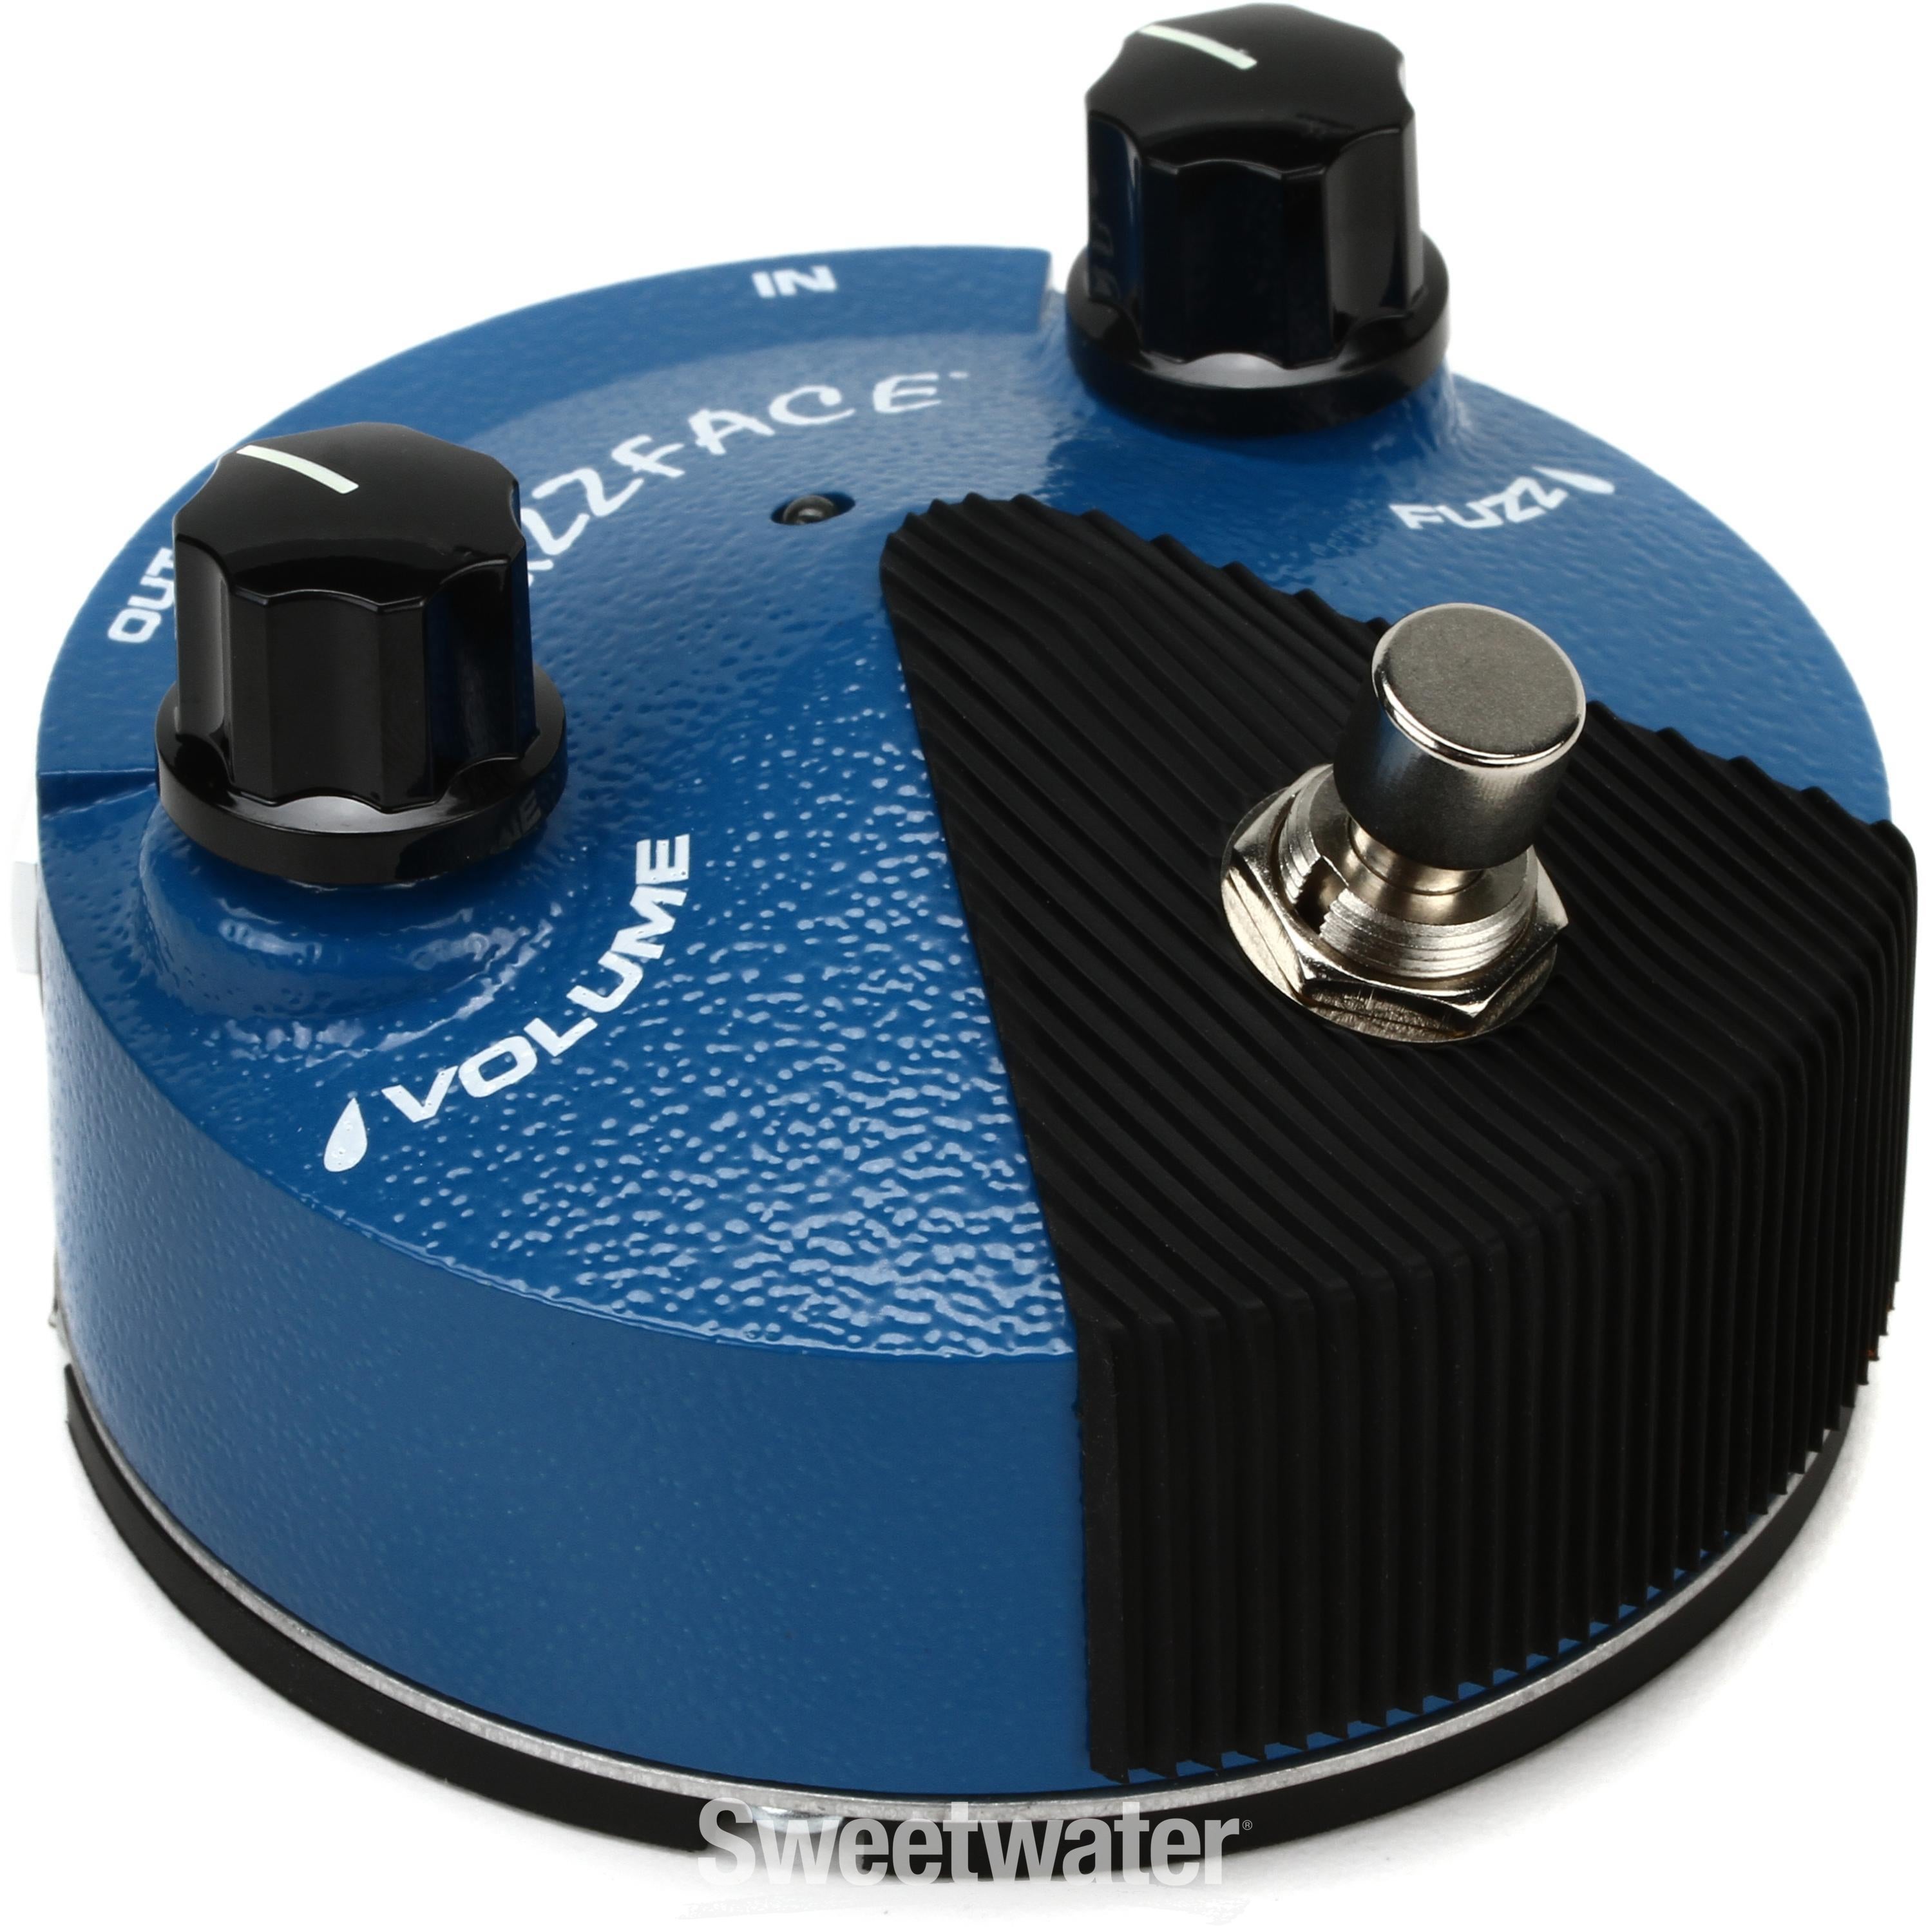 Dunlop FFM1 Silicon Fuzz Face Mini Distortion Pedal | Sweetwater